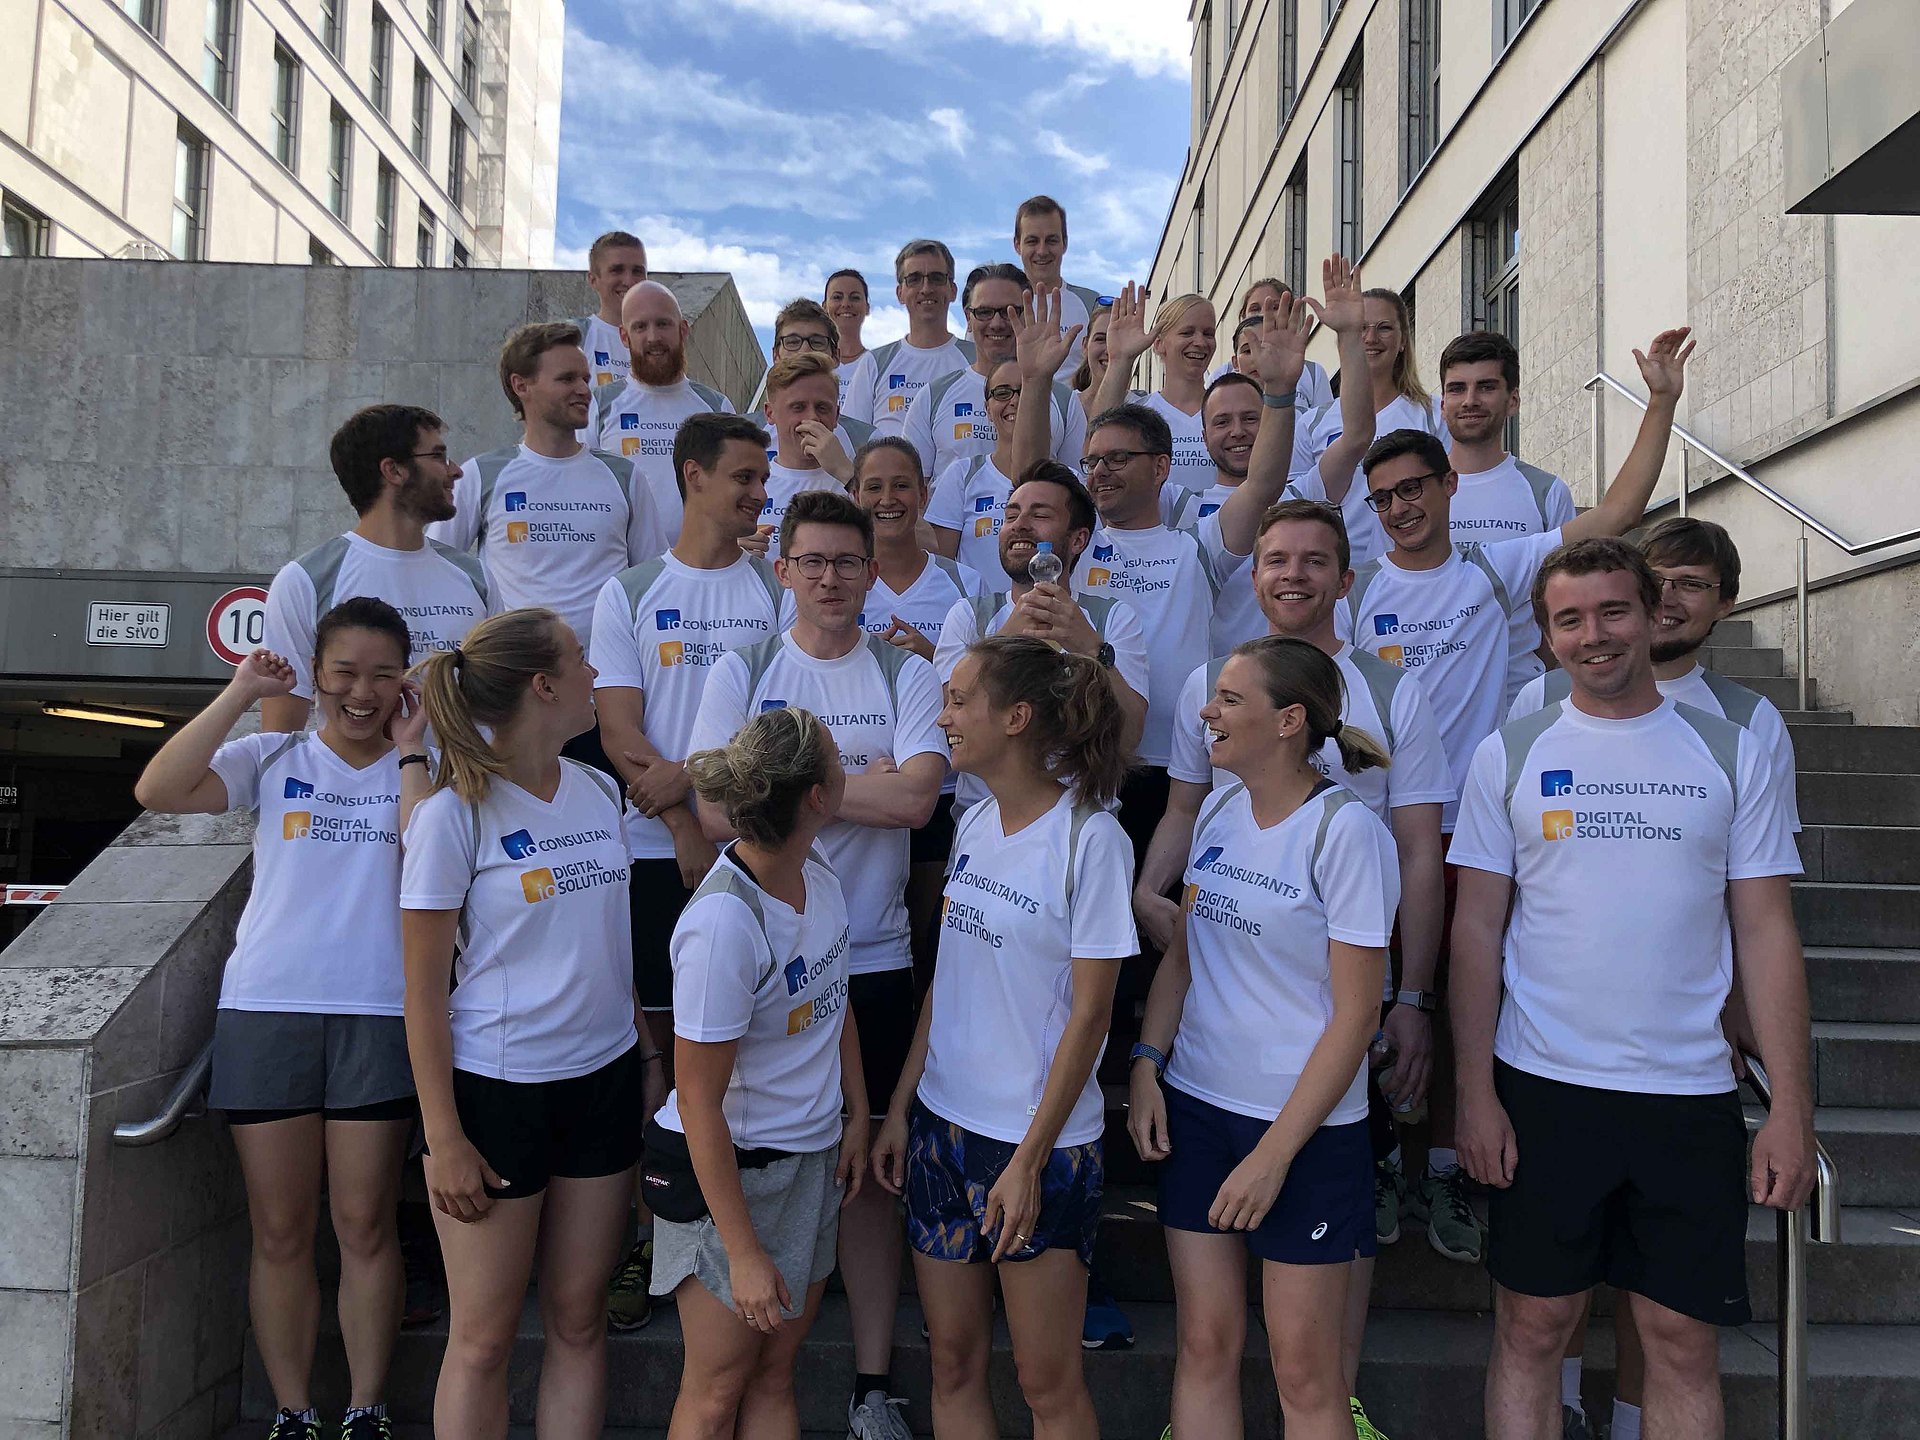 Teamphoto of the participants of the NCT run- in front of the office in Heidelberg